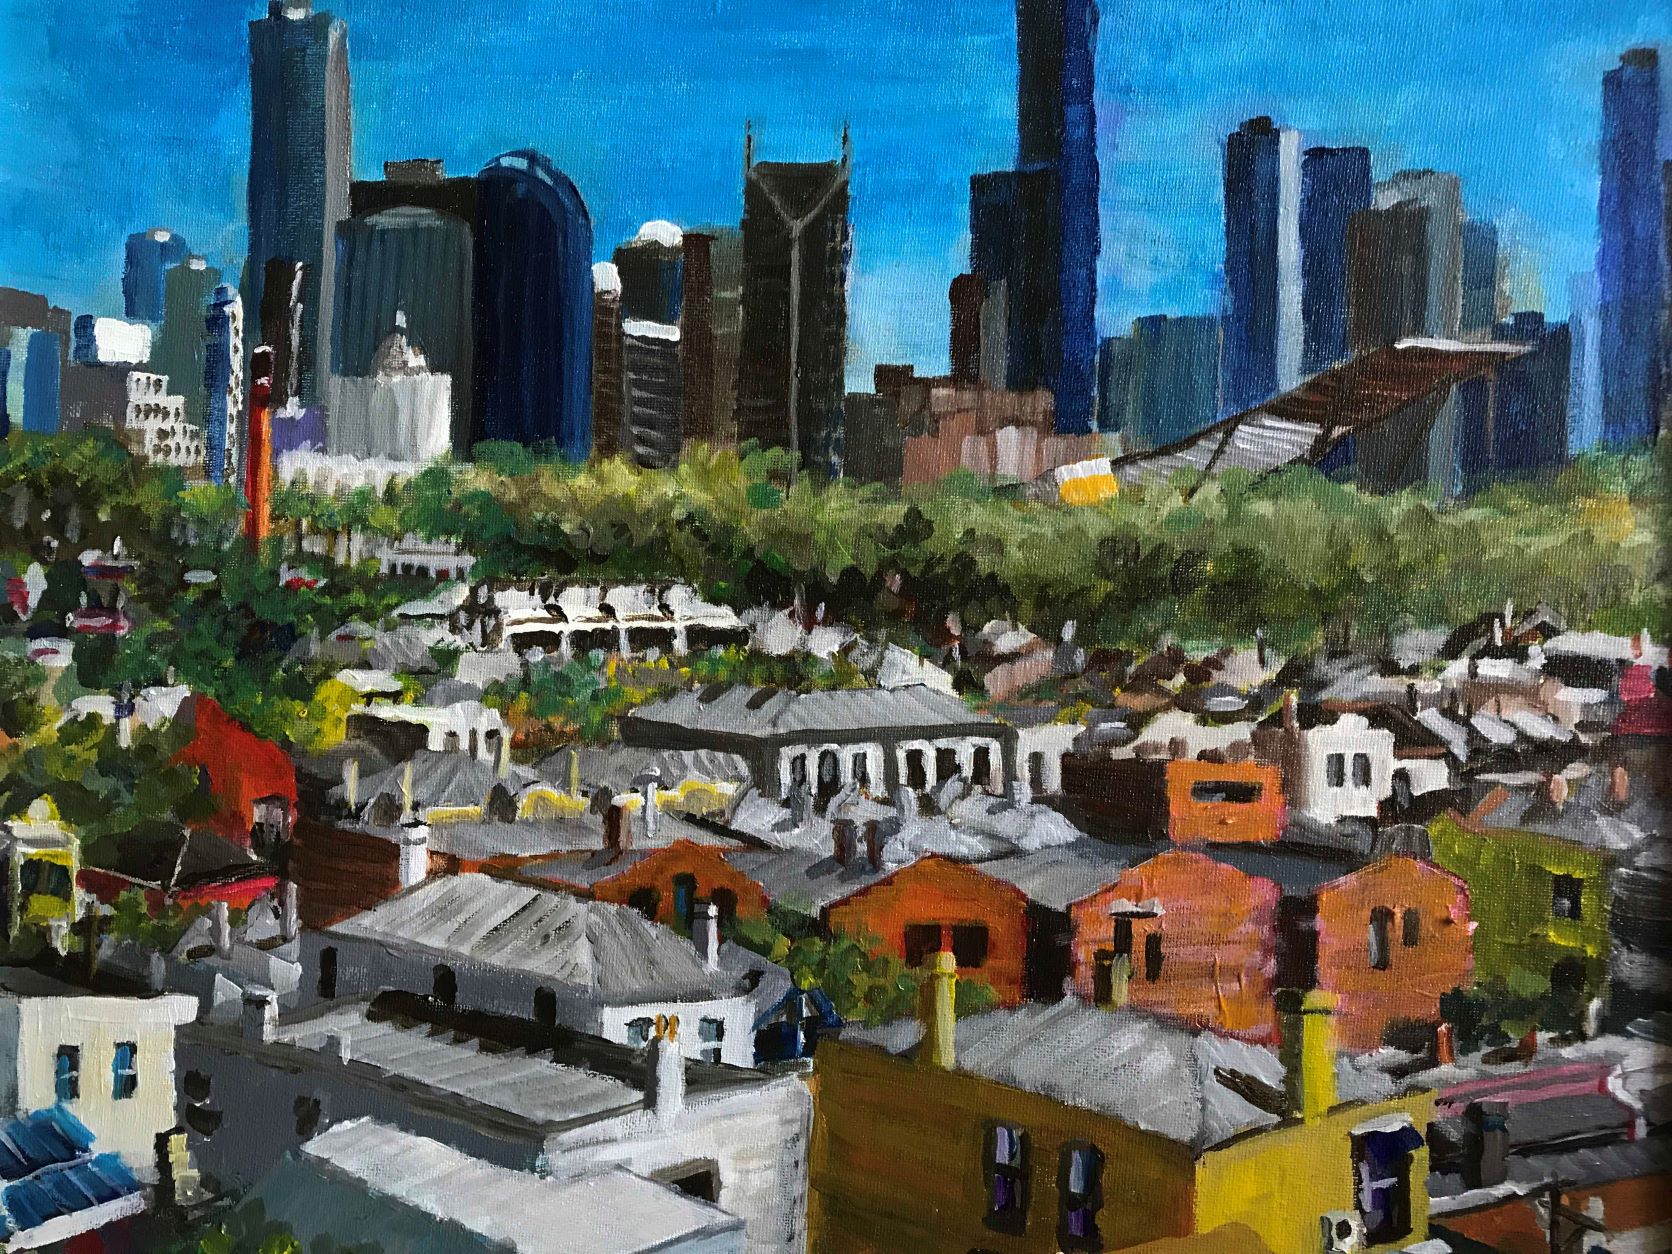 City View. A painting of the Melbourne Skyline by Errol Loader